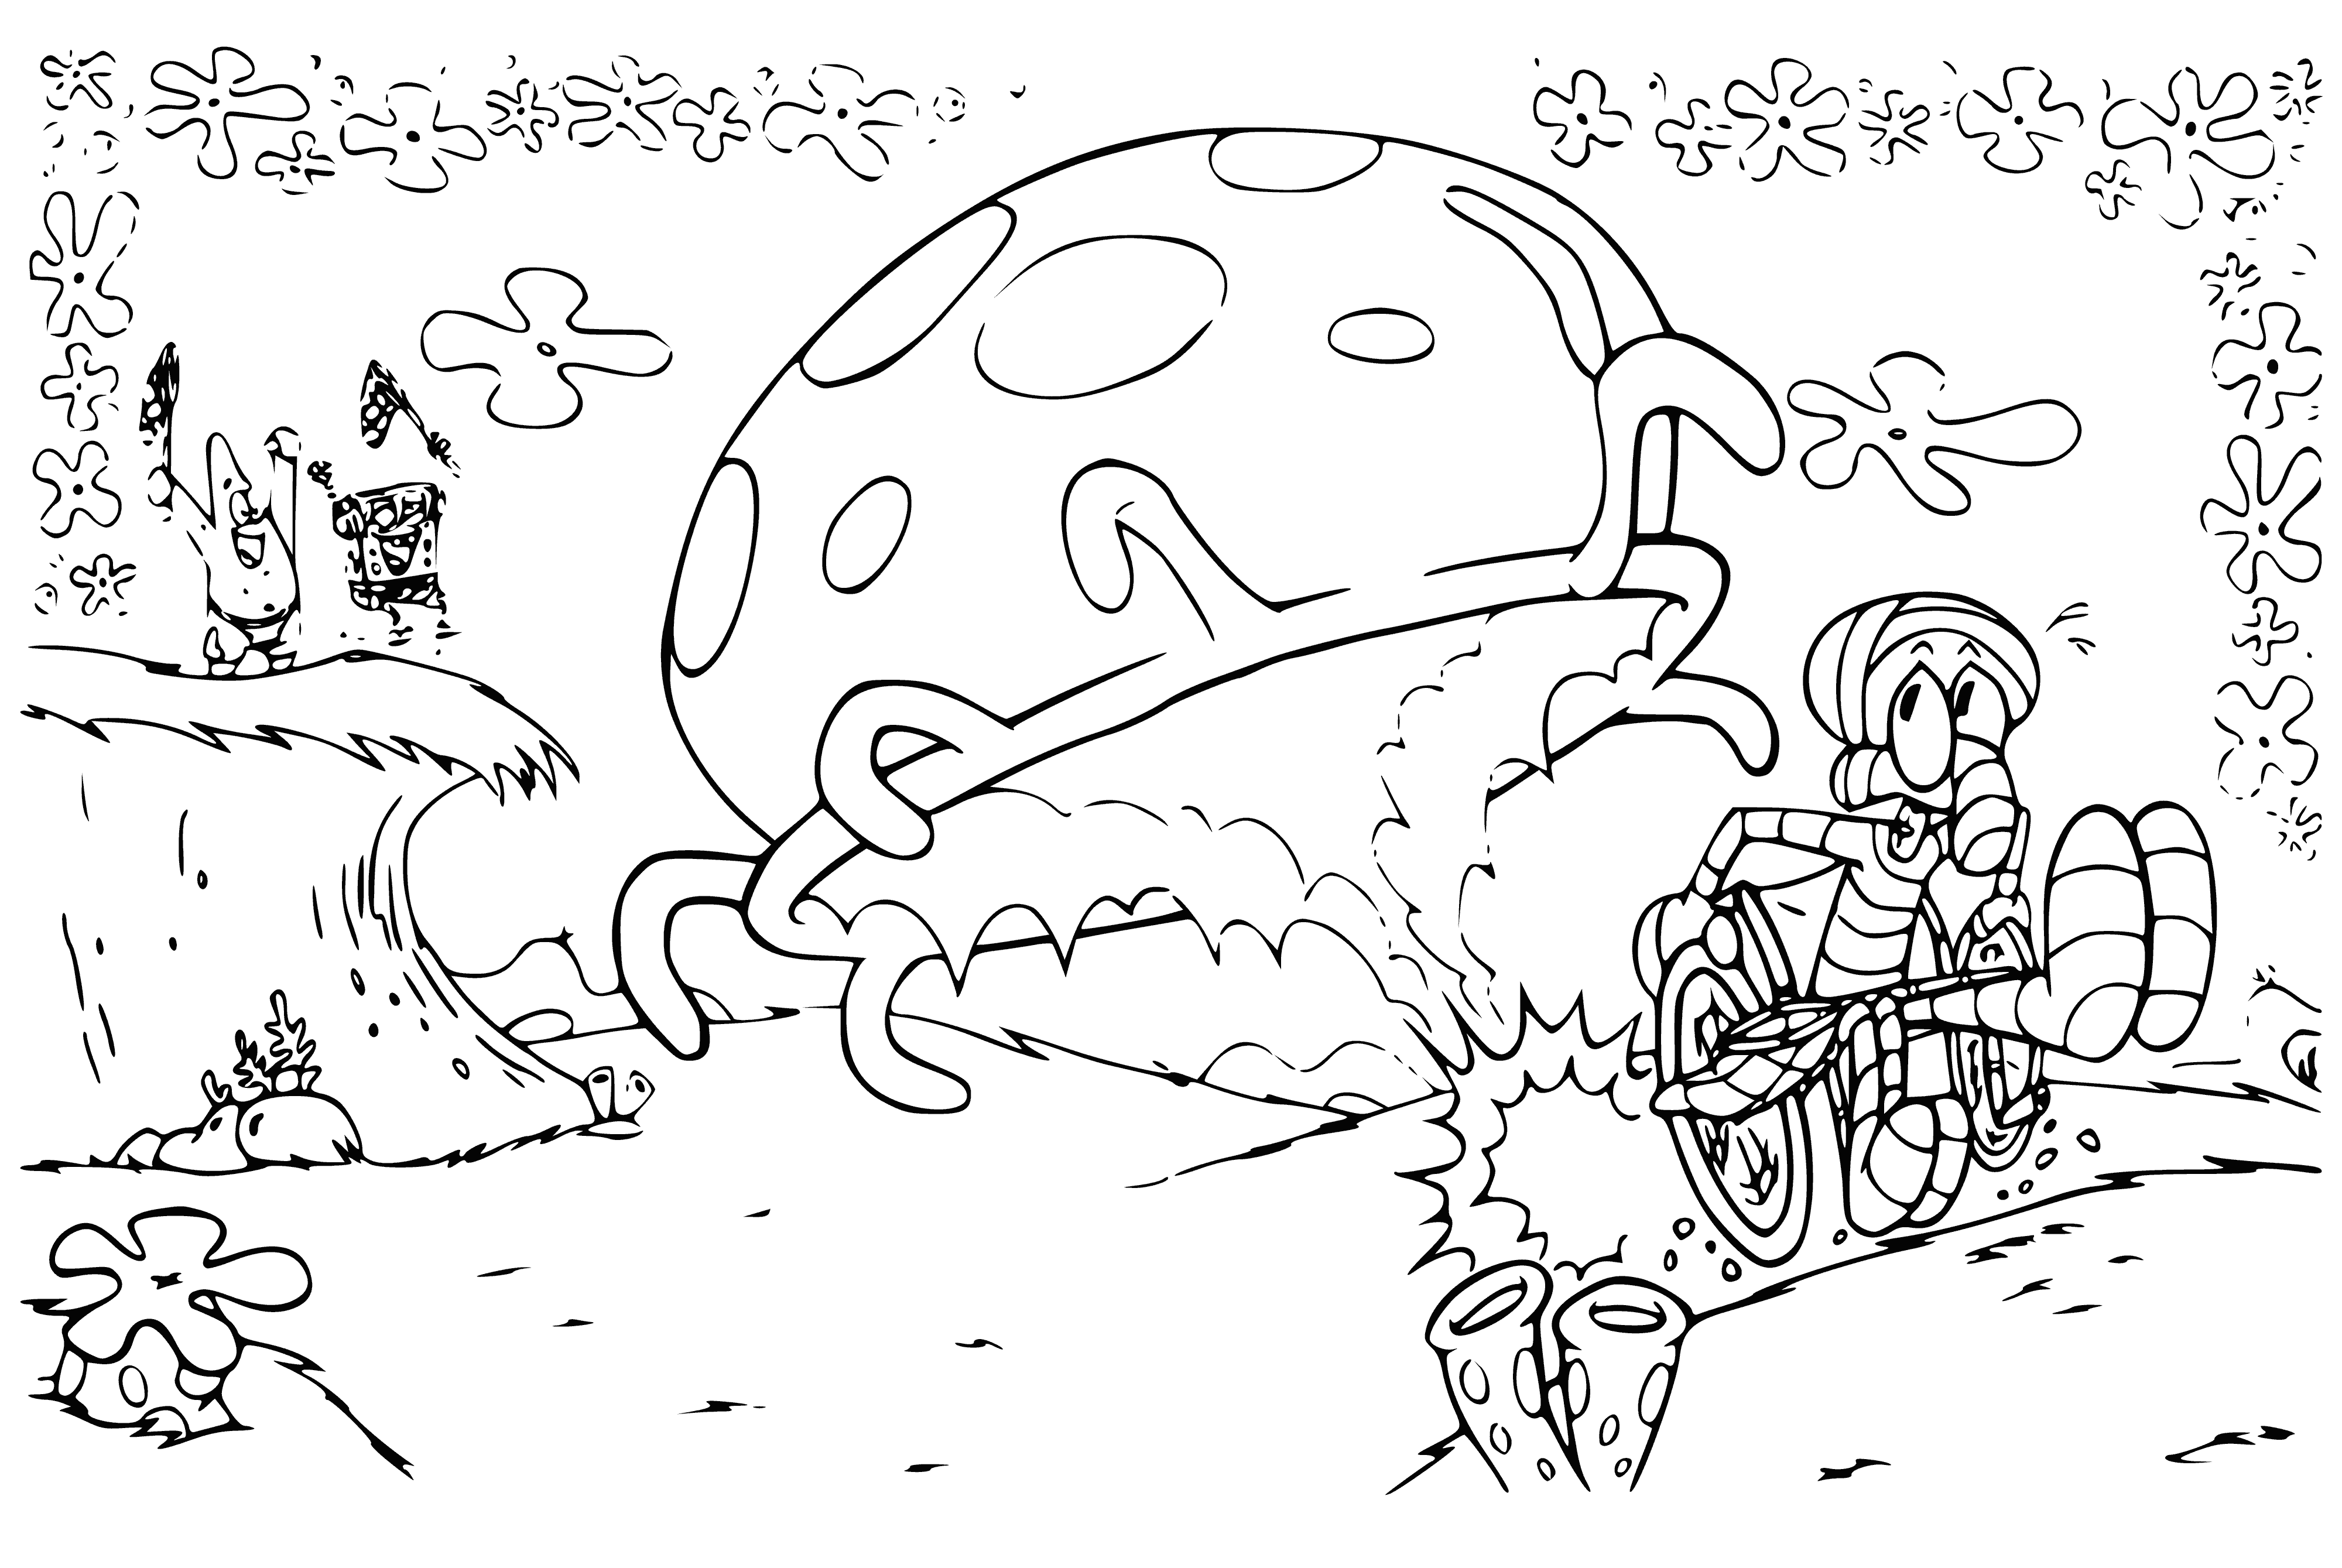 coloring page: Cartoon SpongeBob stands next to giant purple jellyfish with yellow spots & 8 tentacles. He's wearing a red tie & shorts with white shirt & big blue eyes.